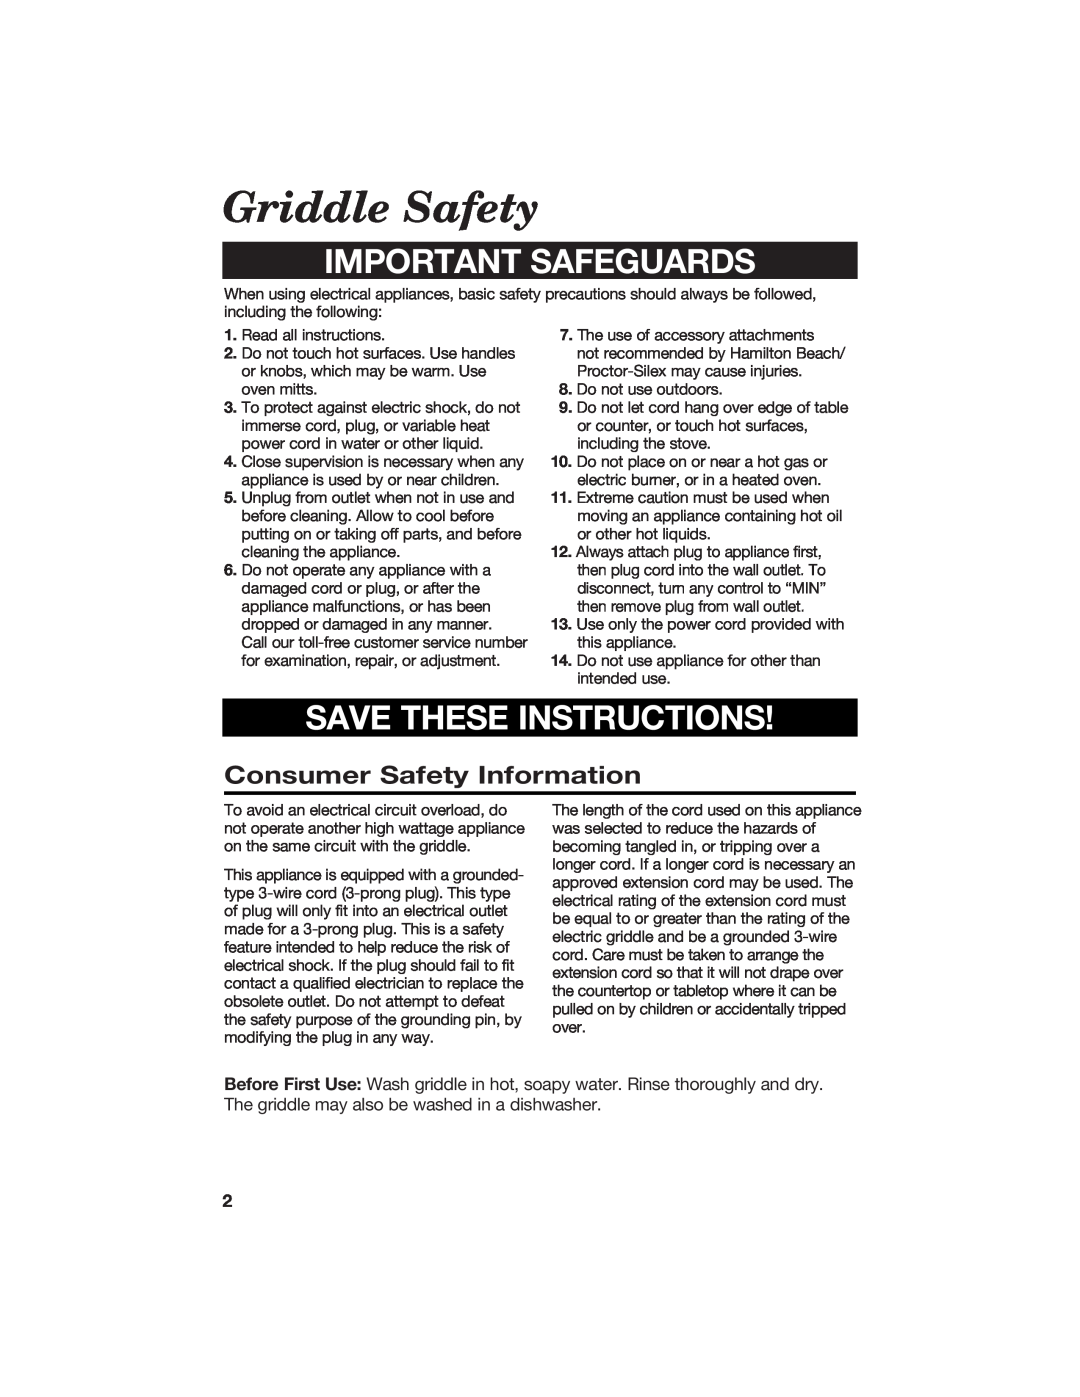 Hamilton Beach 840098400 manual Griddle Safety, Consumer Safety Information, Important Safeguards, Save These Instructions 